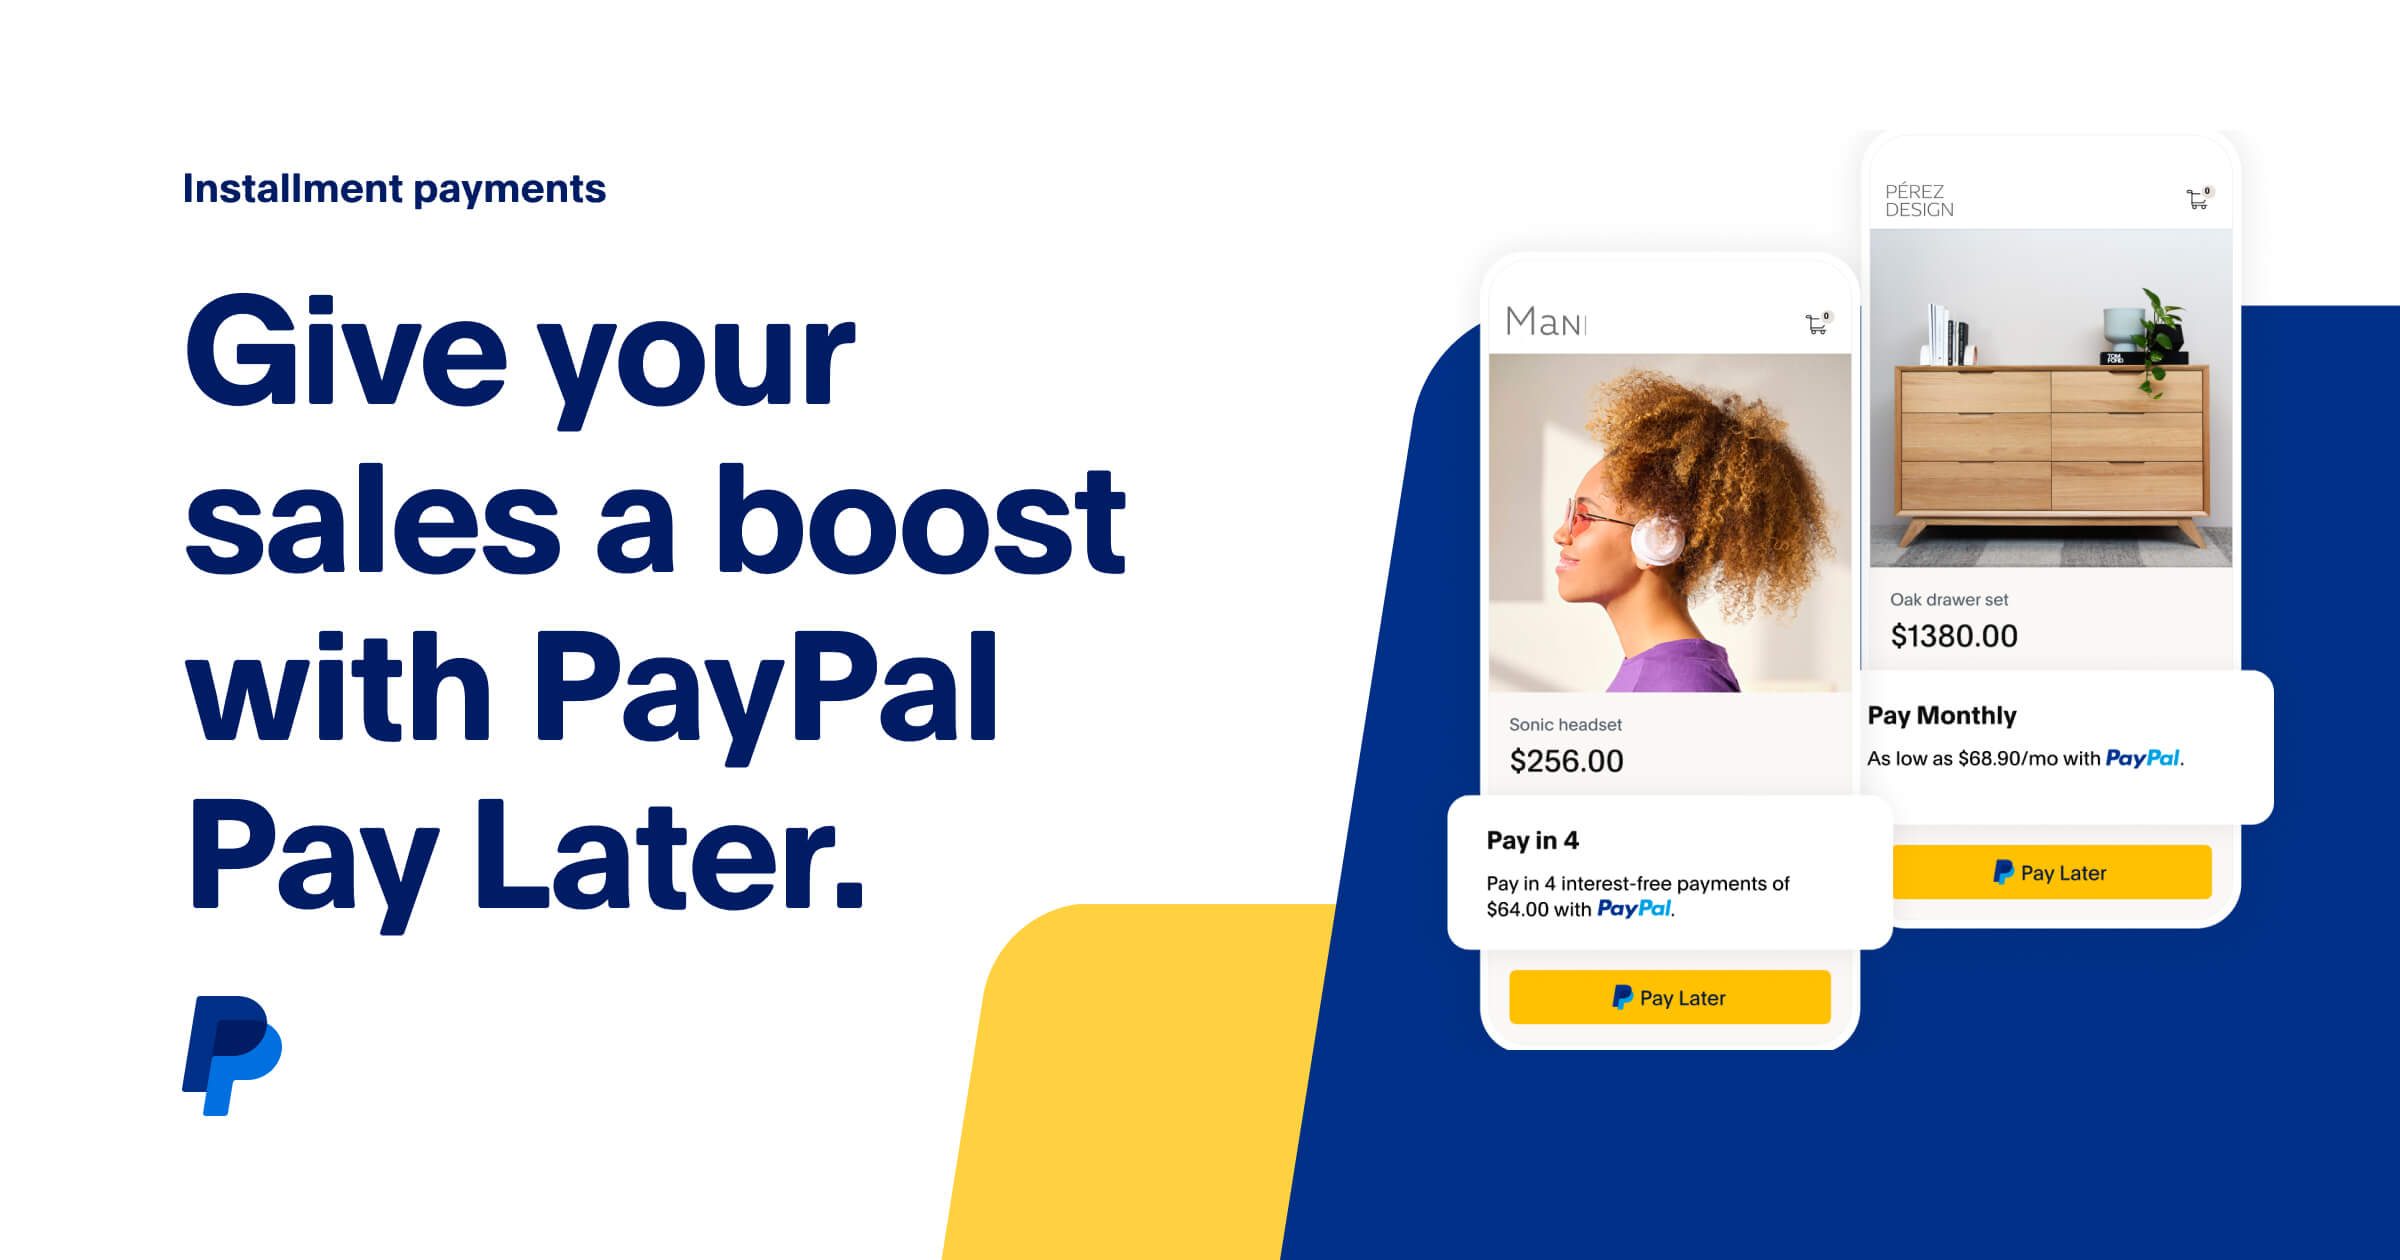 Is it bad to Pay in 3 with PayPal?